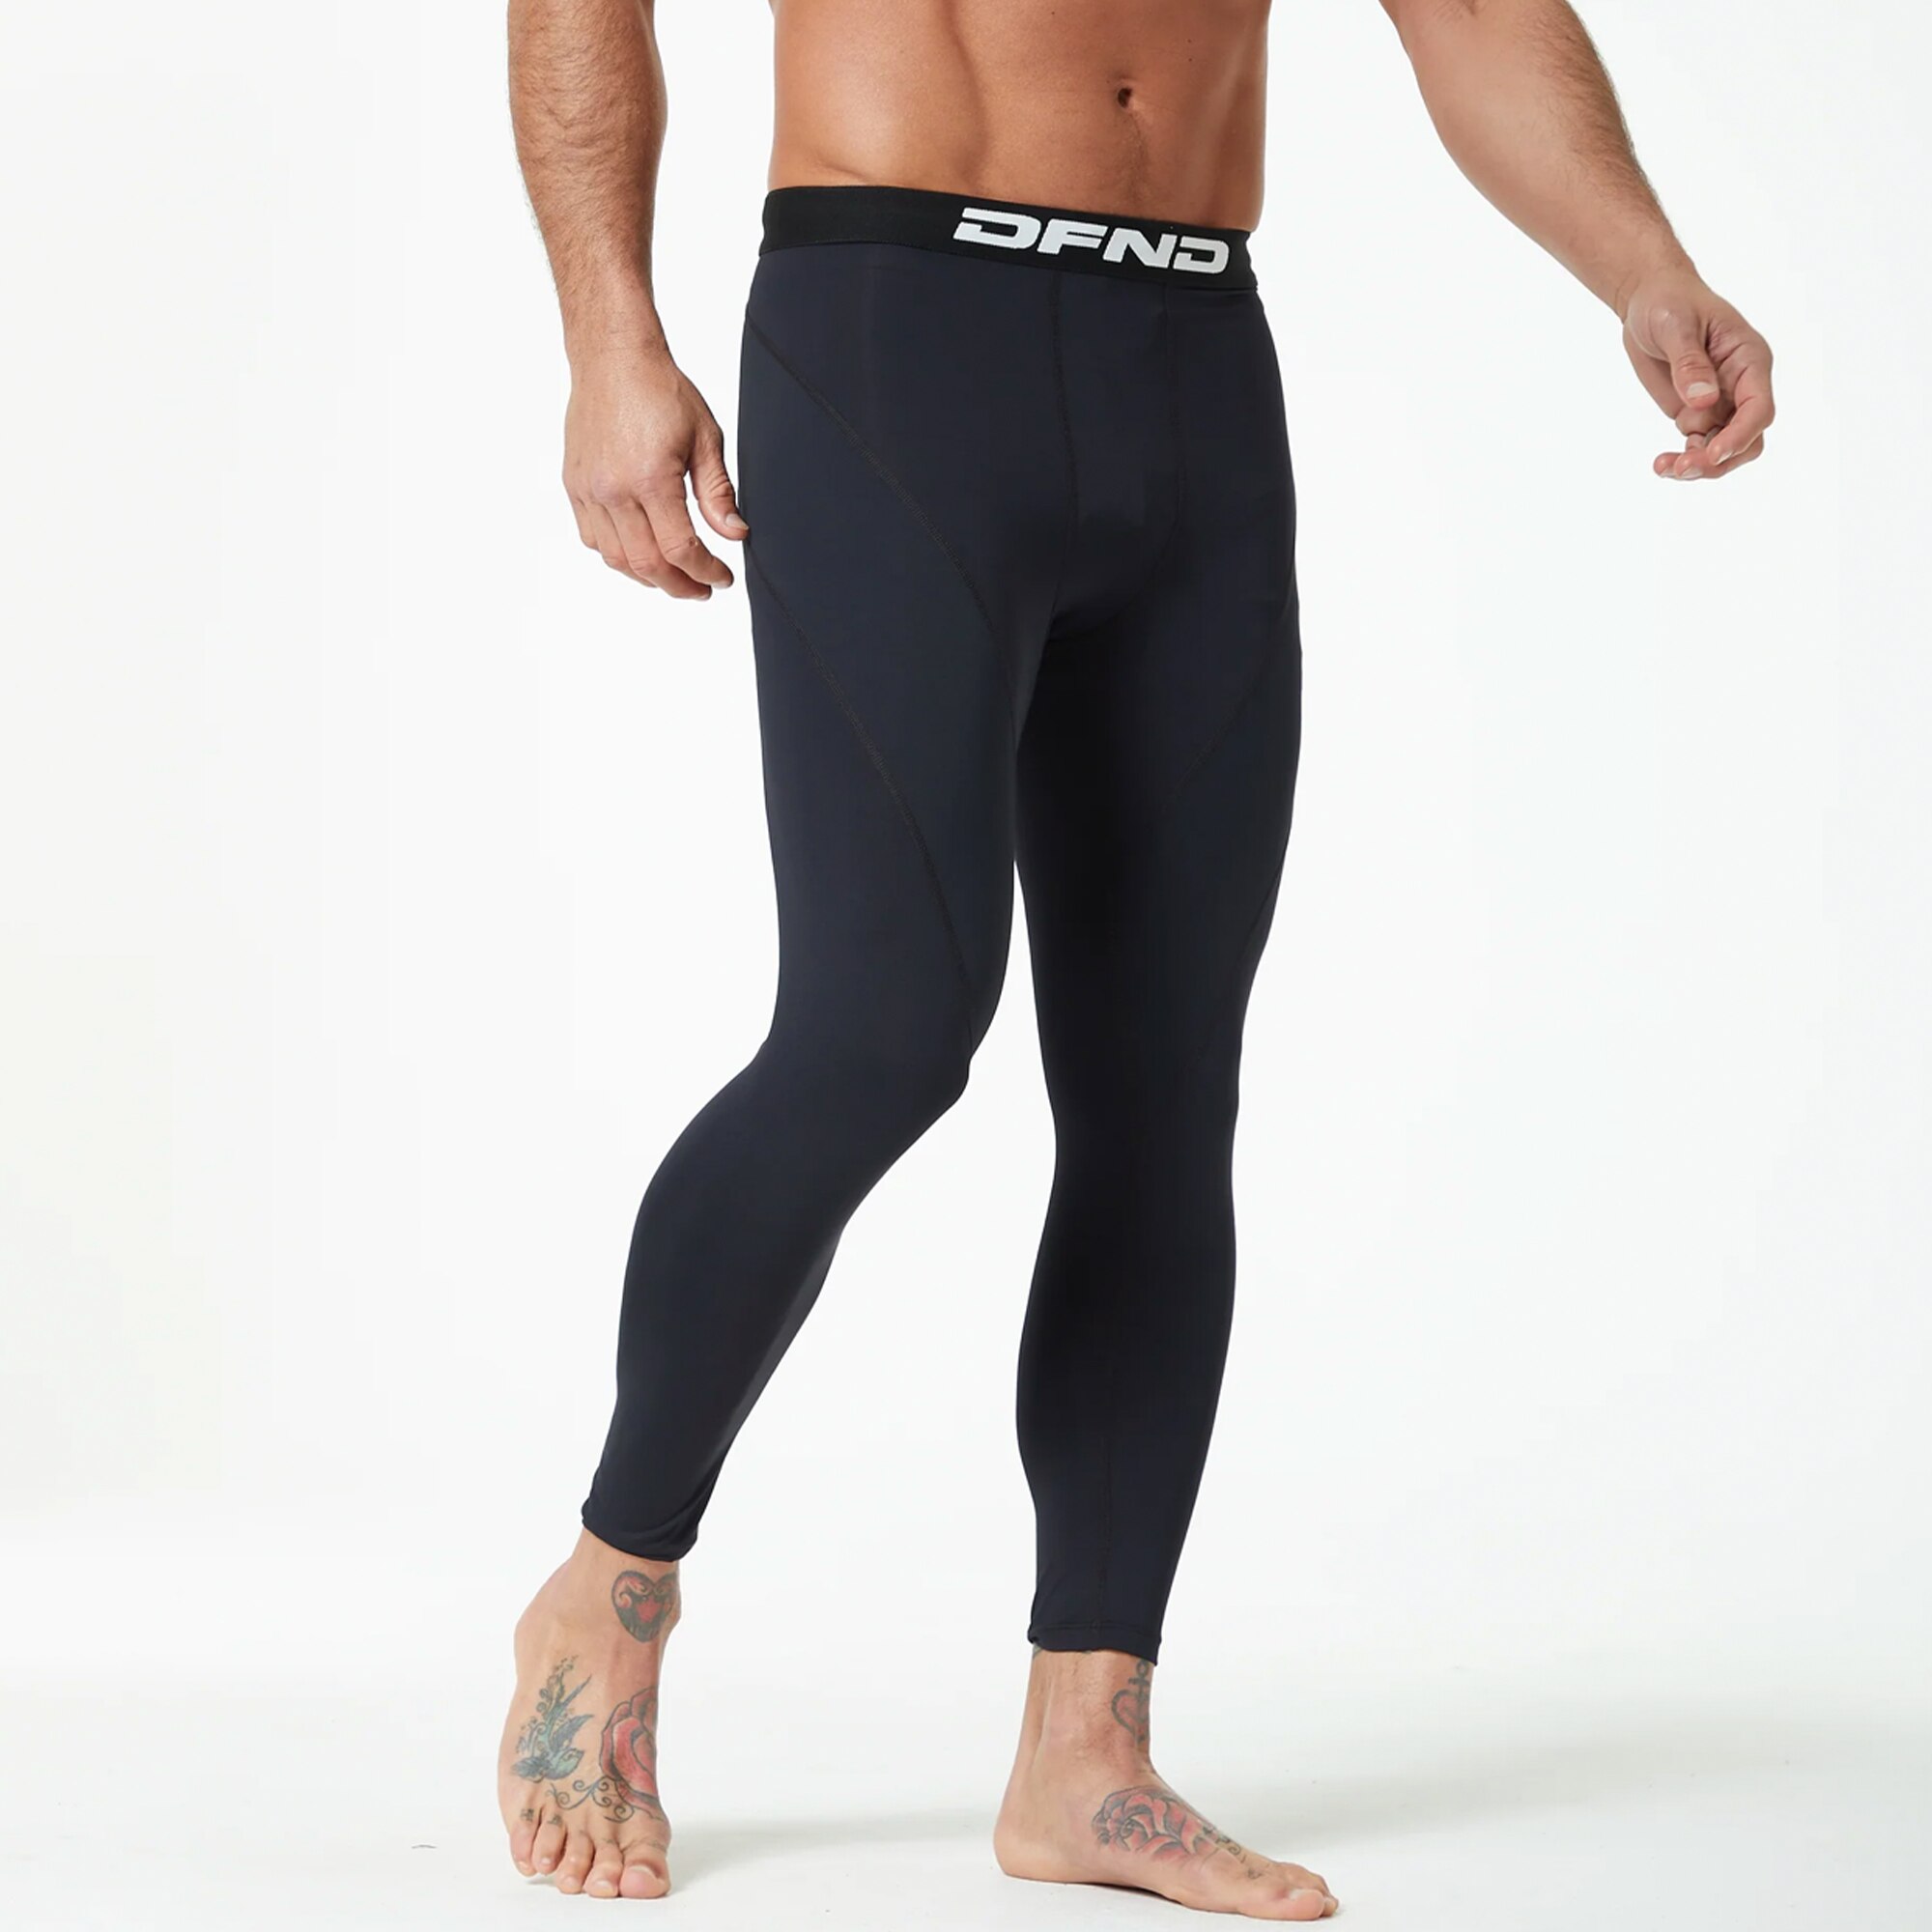 NEW: DNFD Active AX Compression Tights - CVS PharmacyIngredients - CVS ...